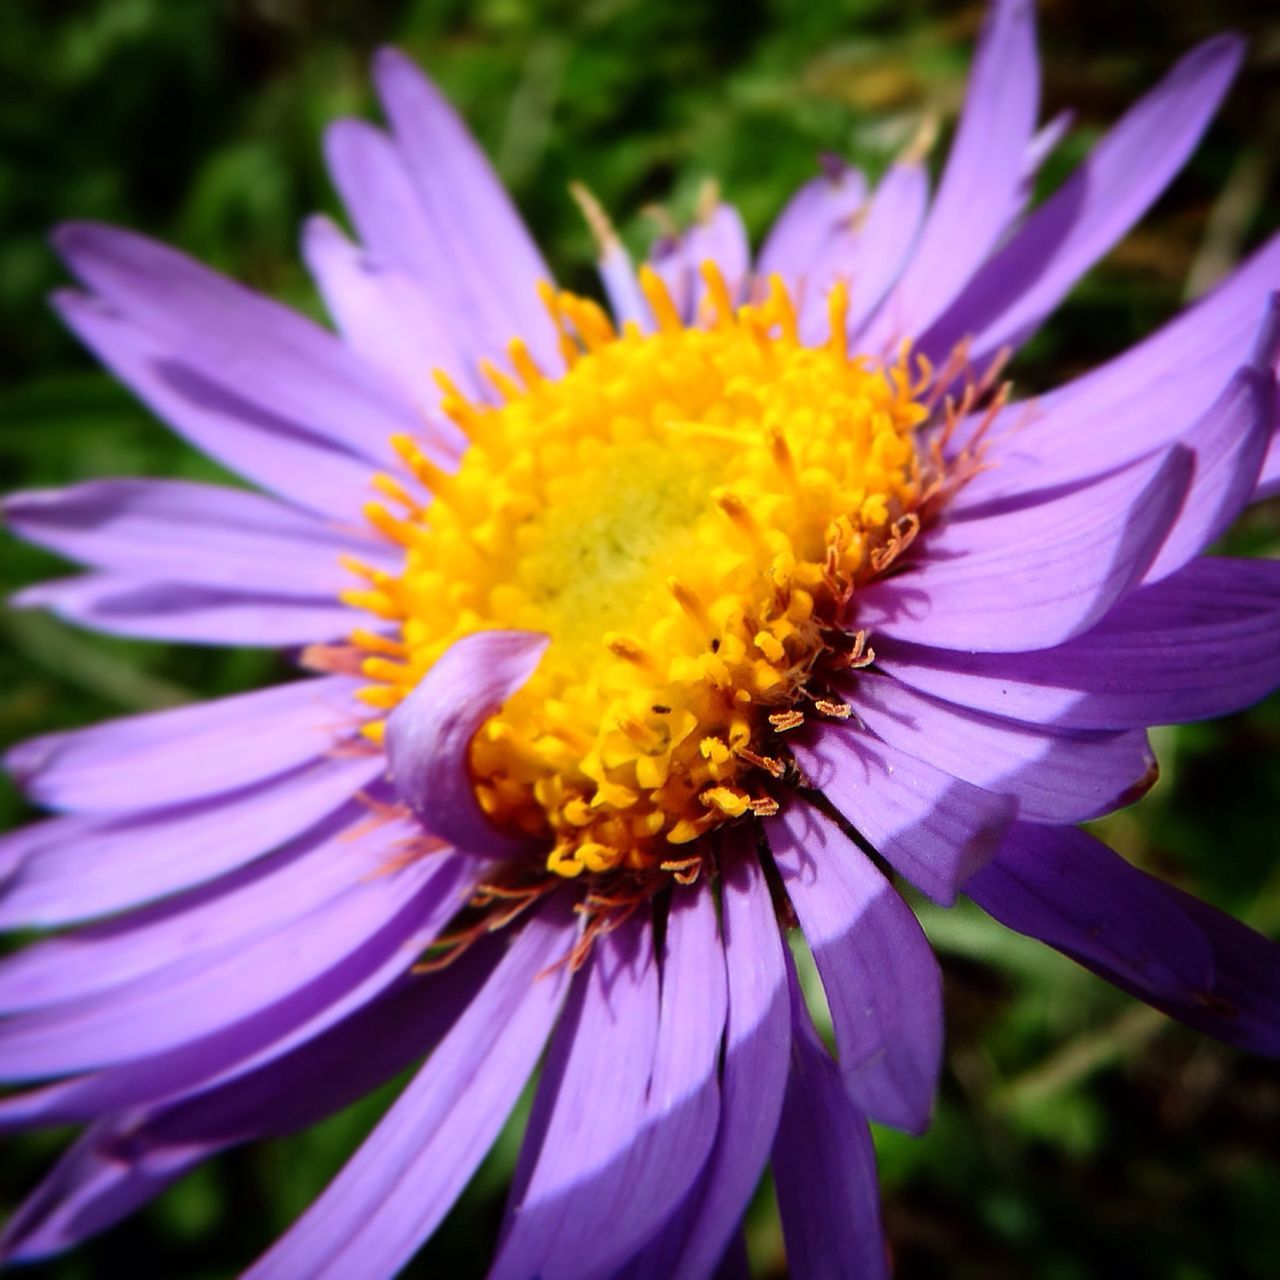 flower, petal, freshness, flower head, fragility, pollen, beauty in nature, growth, close-up, purple, blooming, nature, focus on foreground, single flower, yellow, stamen, in bloom, plant, no people, outdoors